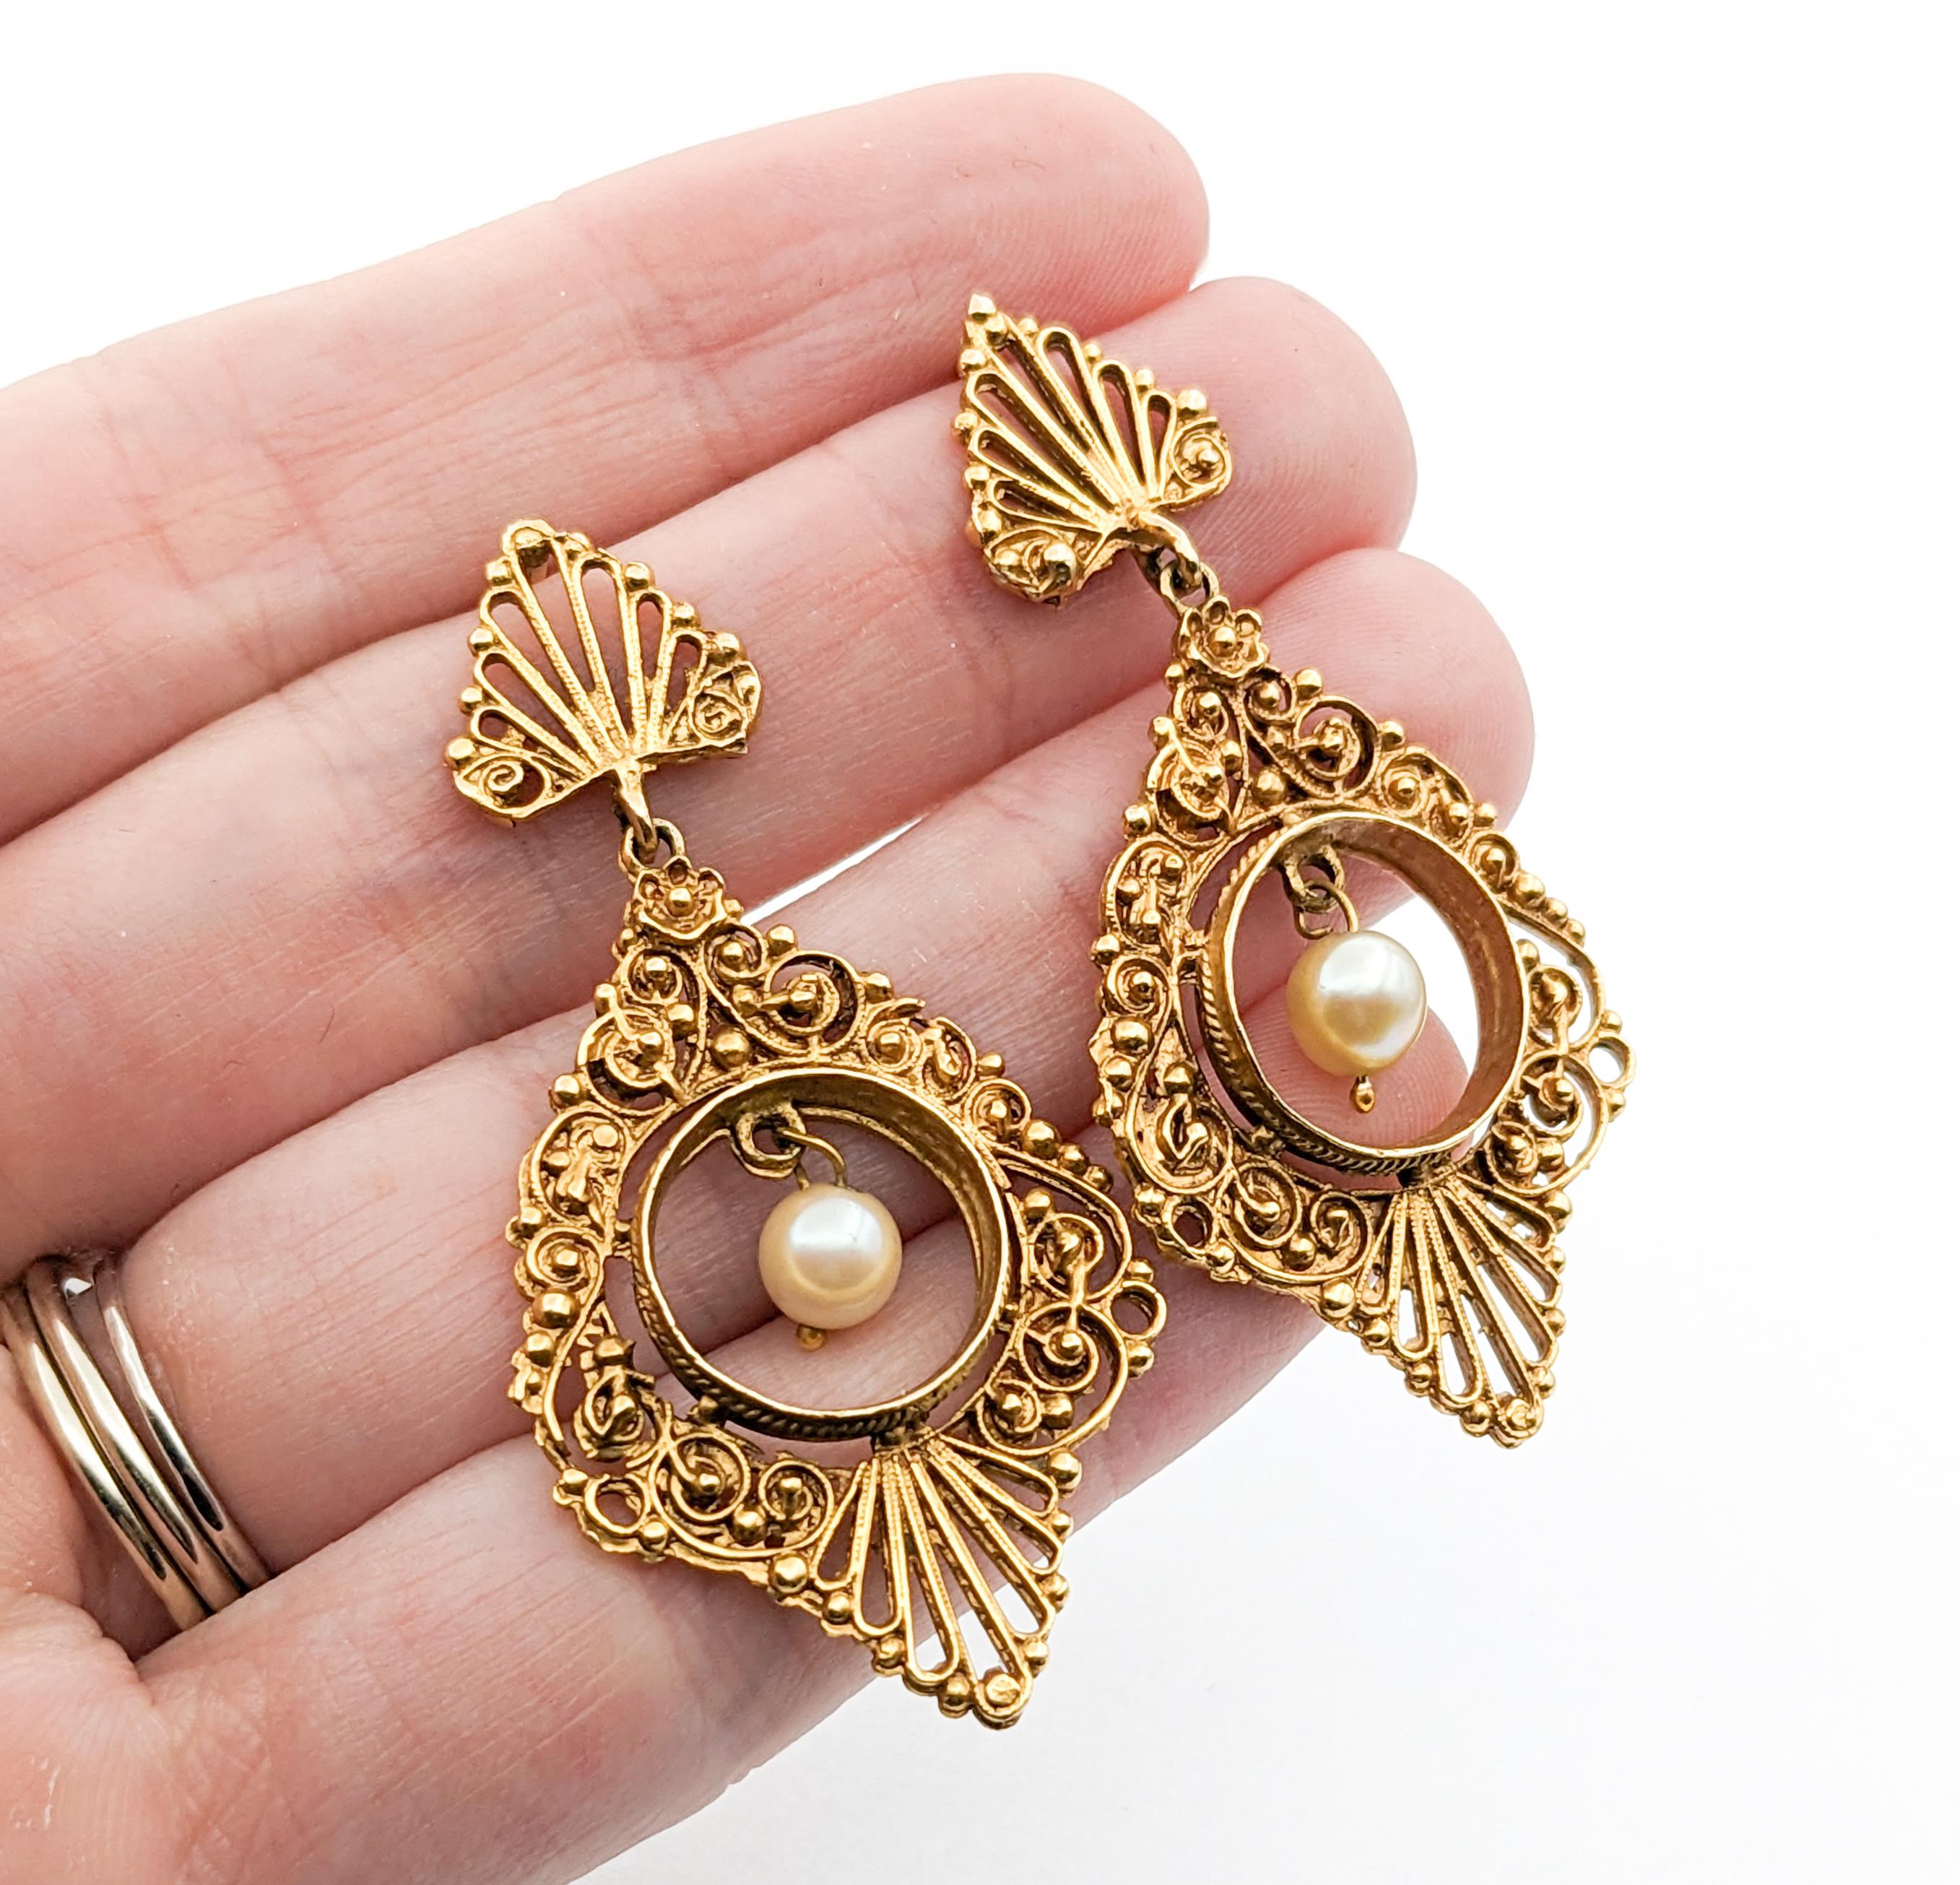 Romantic Vintage Filigree Pearl Drop Earrings in Yellow Gold In Excellent Condition For Sale In Bloomington, MN